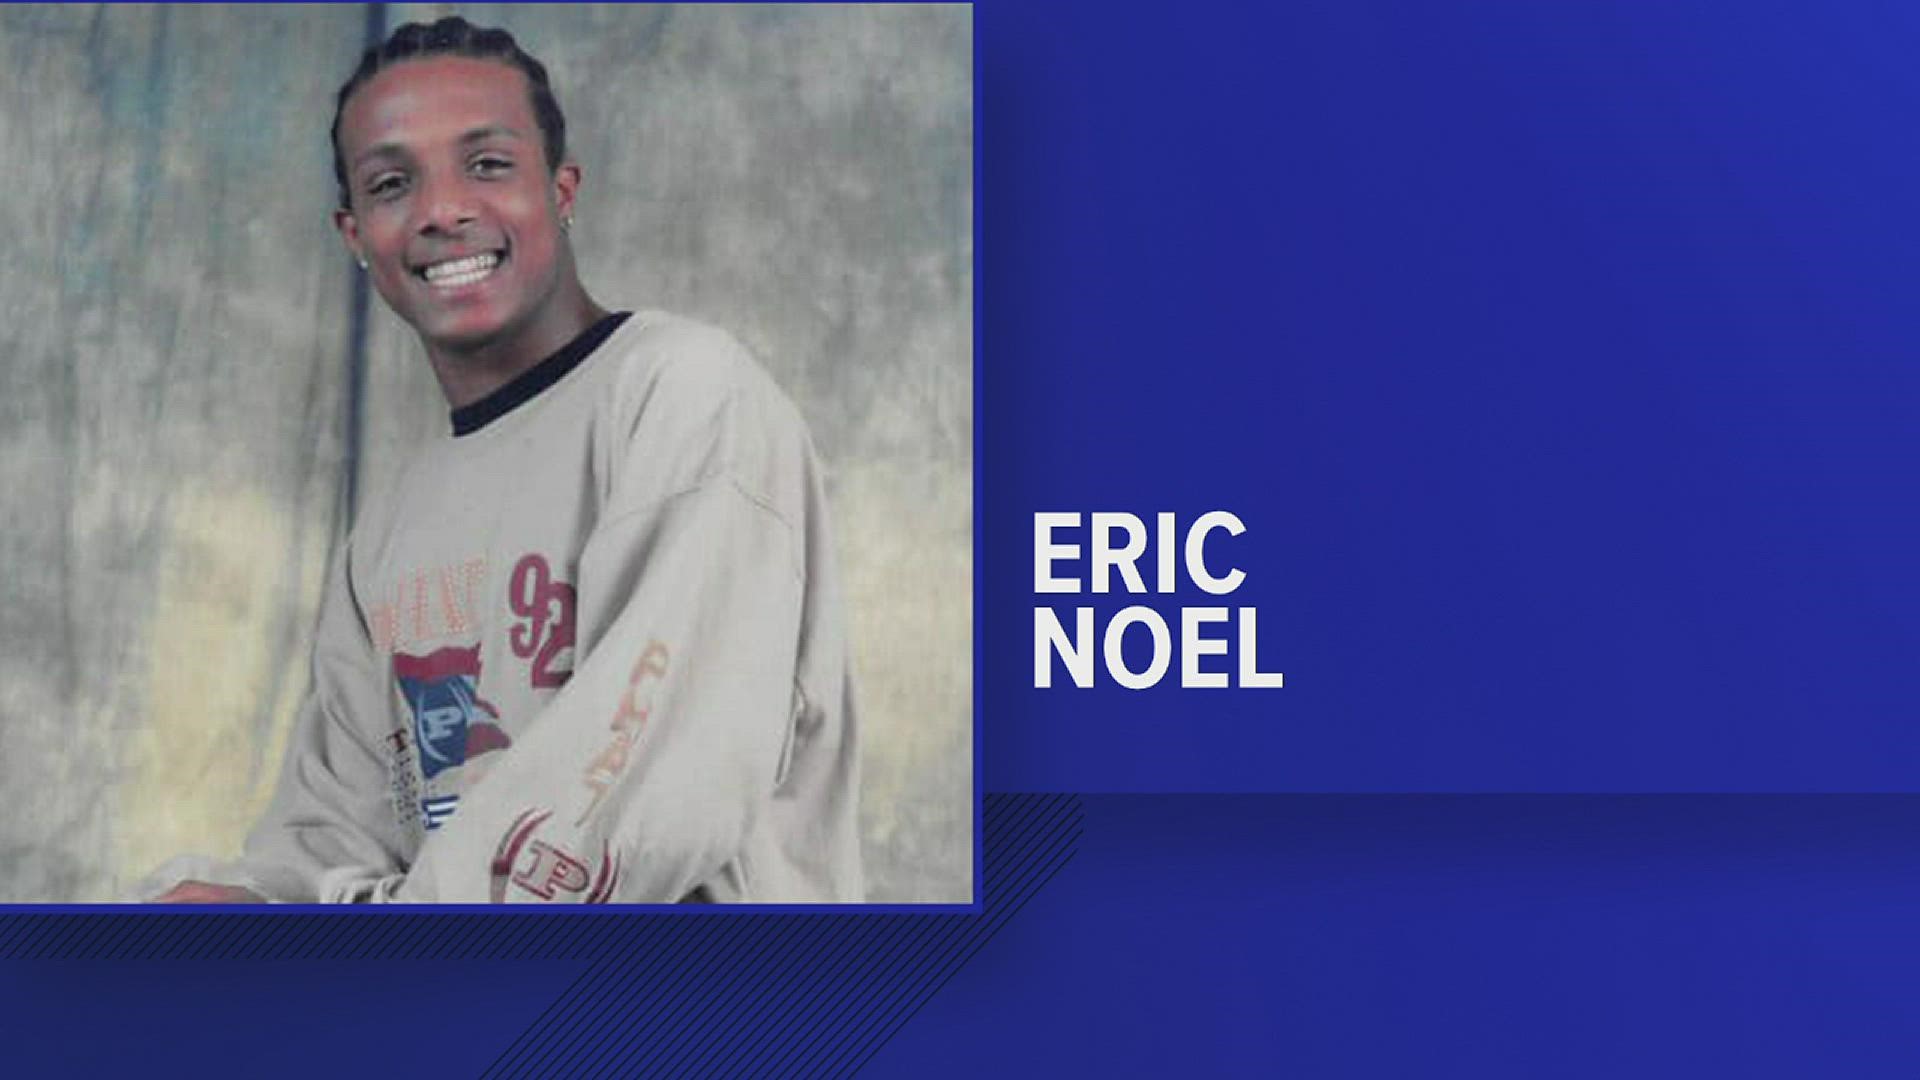 Eric Noel had been shot and left to die in the middle of the roadway, Anyone with information is encouraged to call Crime Stoppers at 833-TIPS.